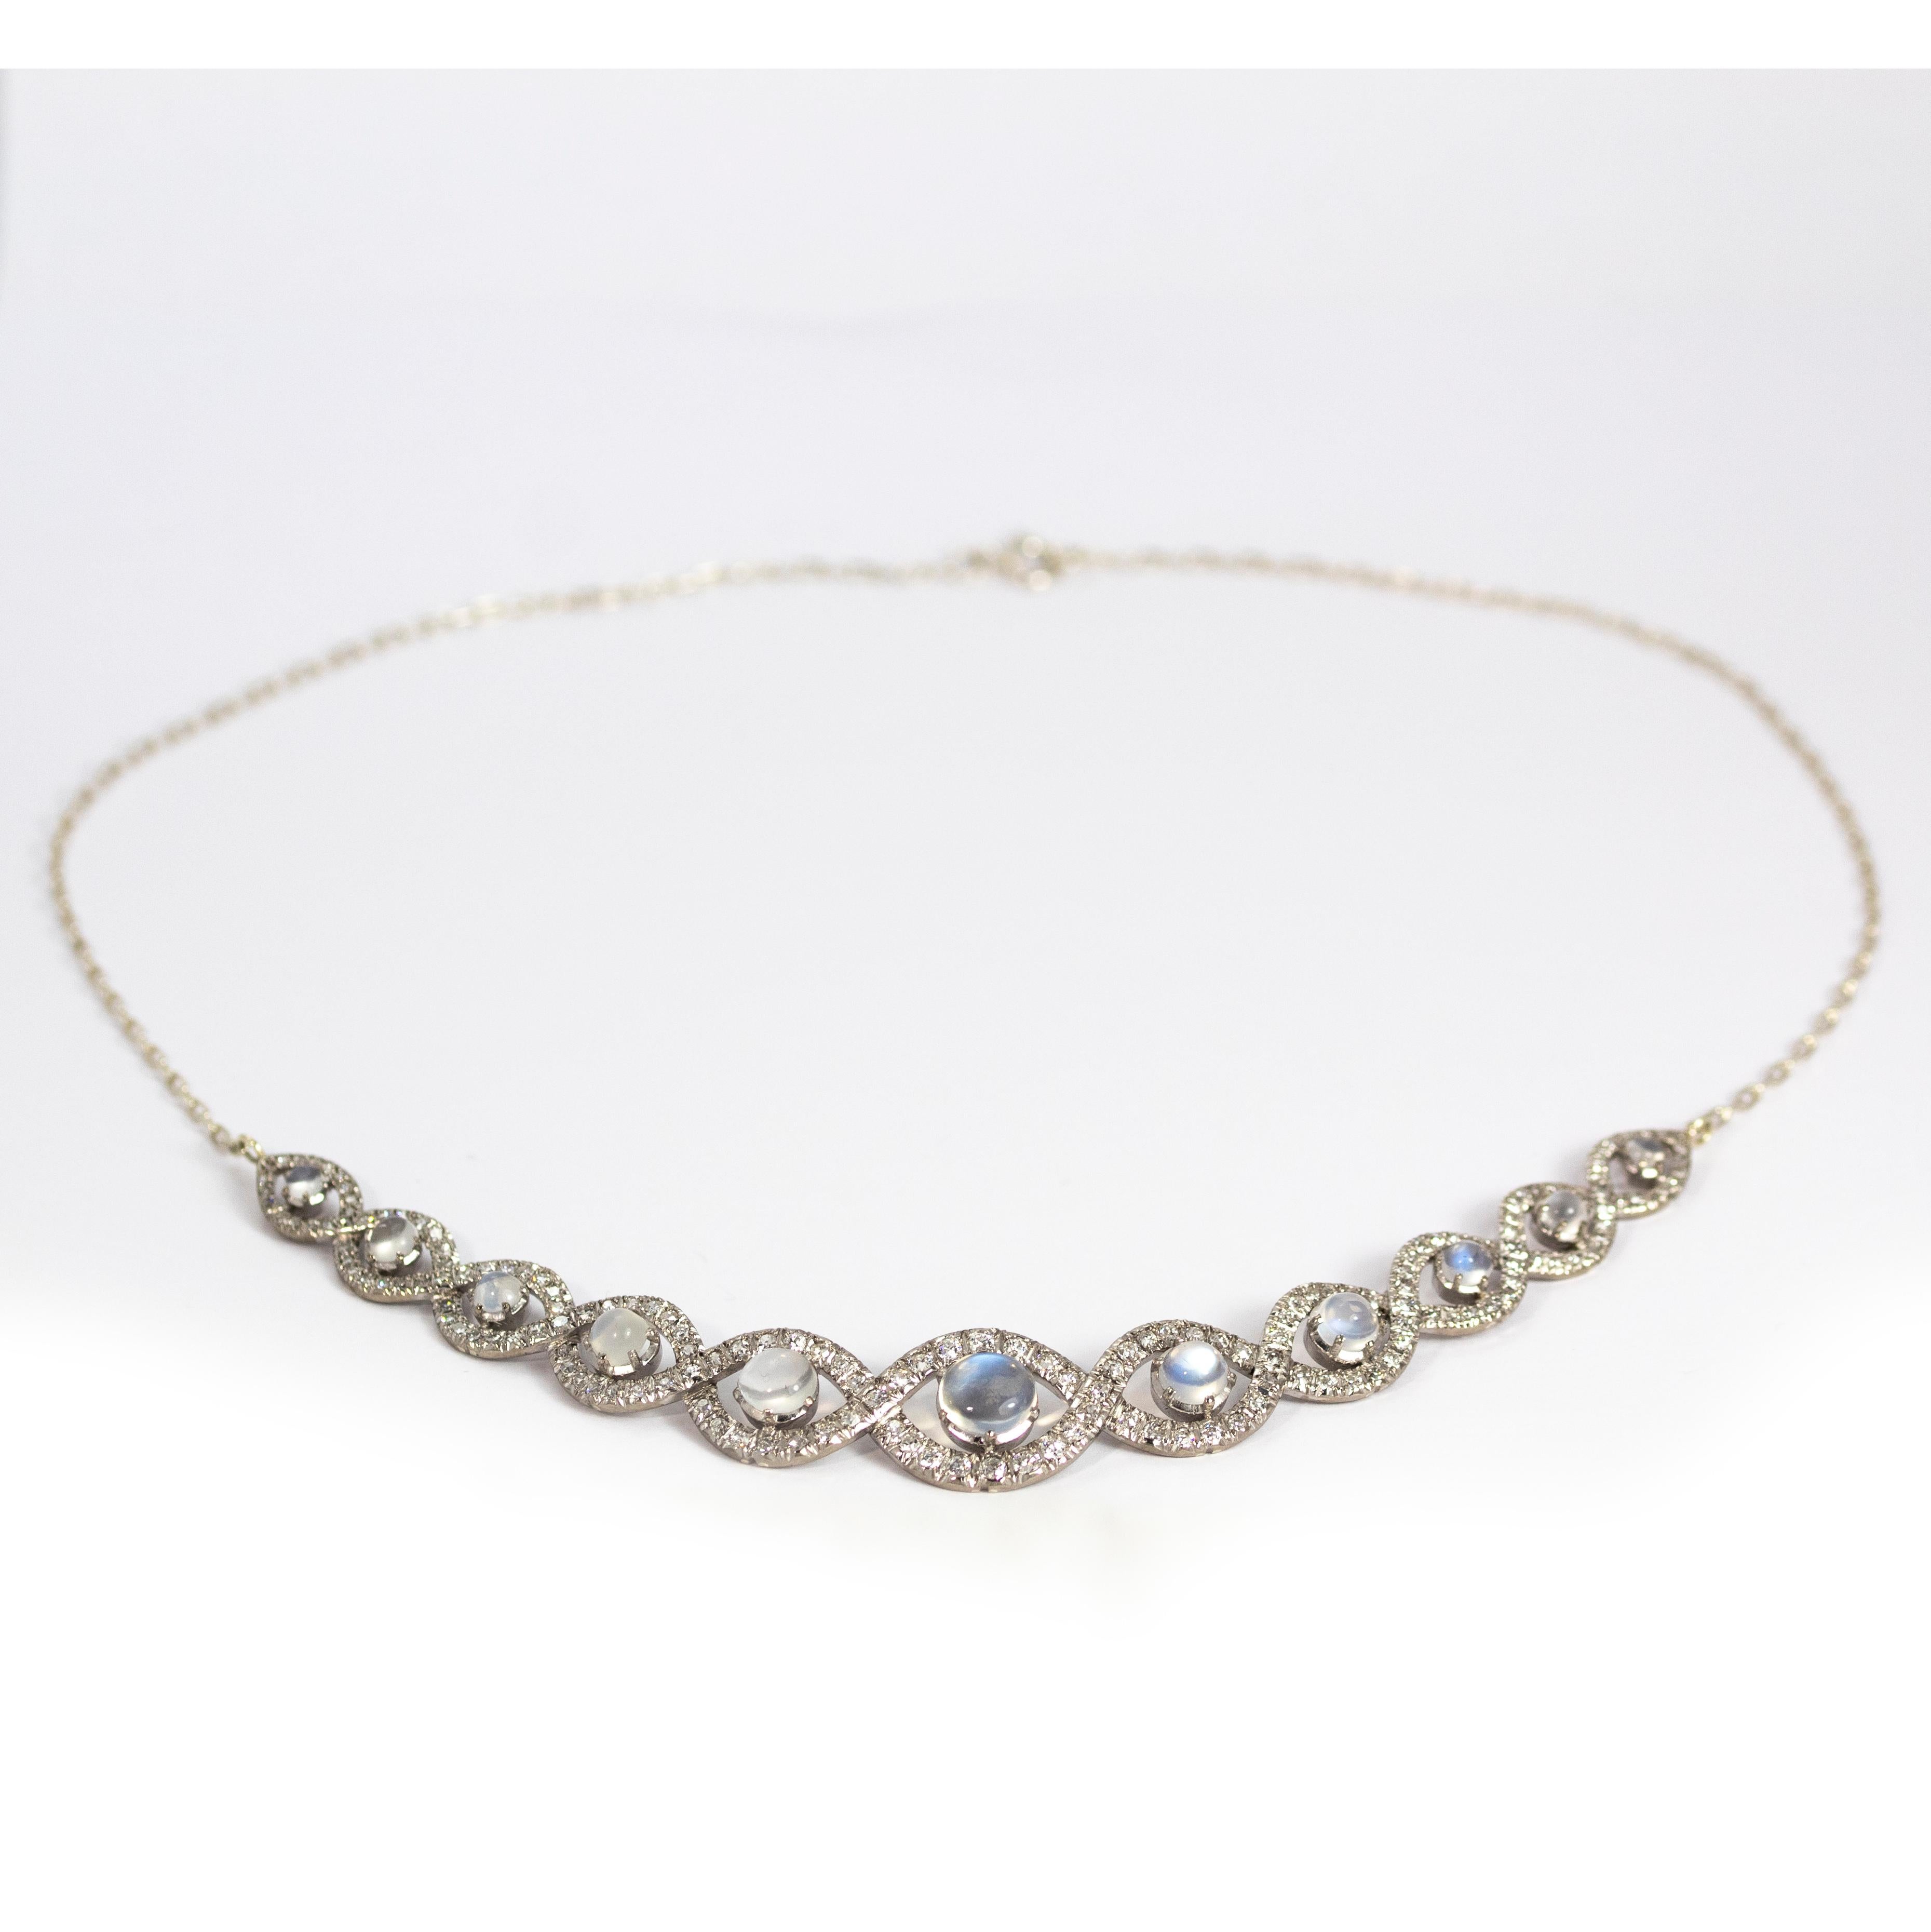 Just take a look at this stunning necklace! The glossy moonstone has a nice blue hue and is set within halos of sparkling diamonds.

Necklace length: chain either side measures 6 1/2 inches, plaque measures 5 inches wide